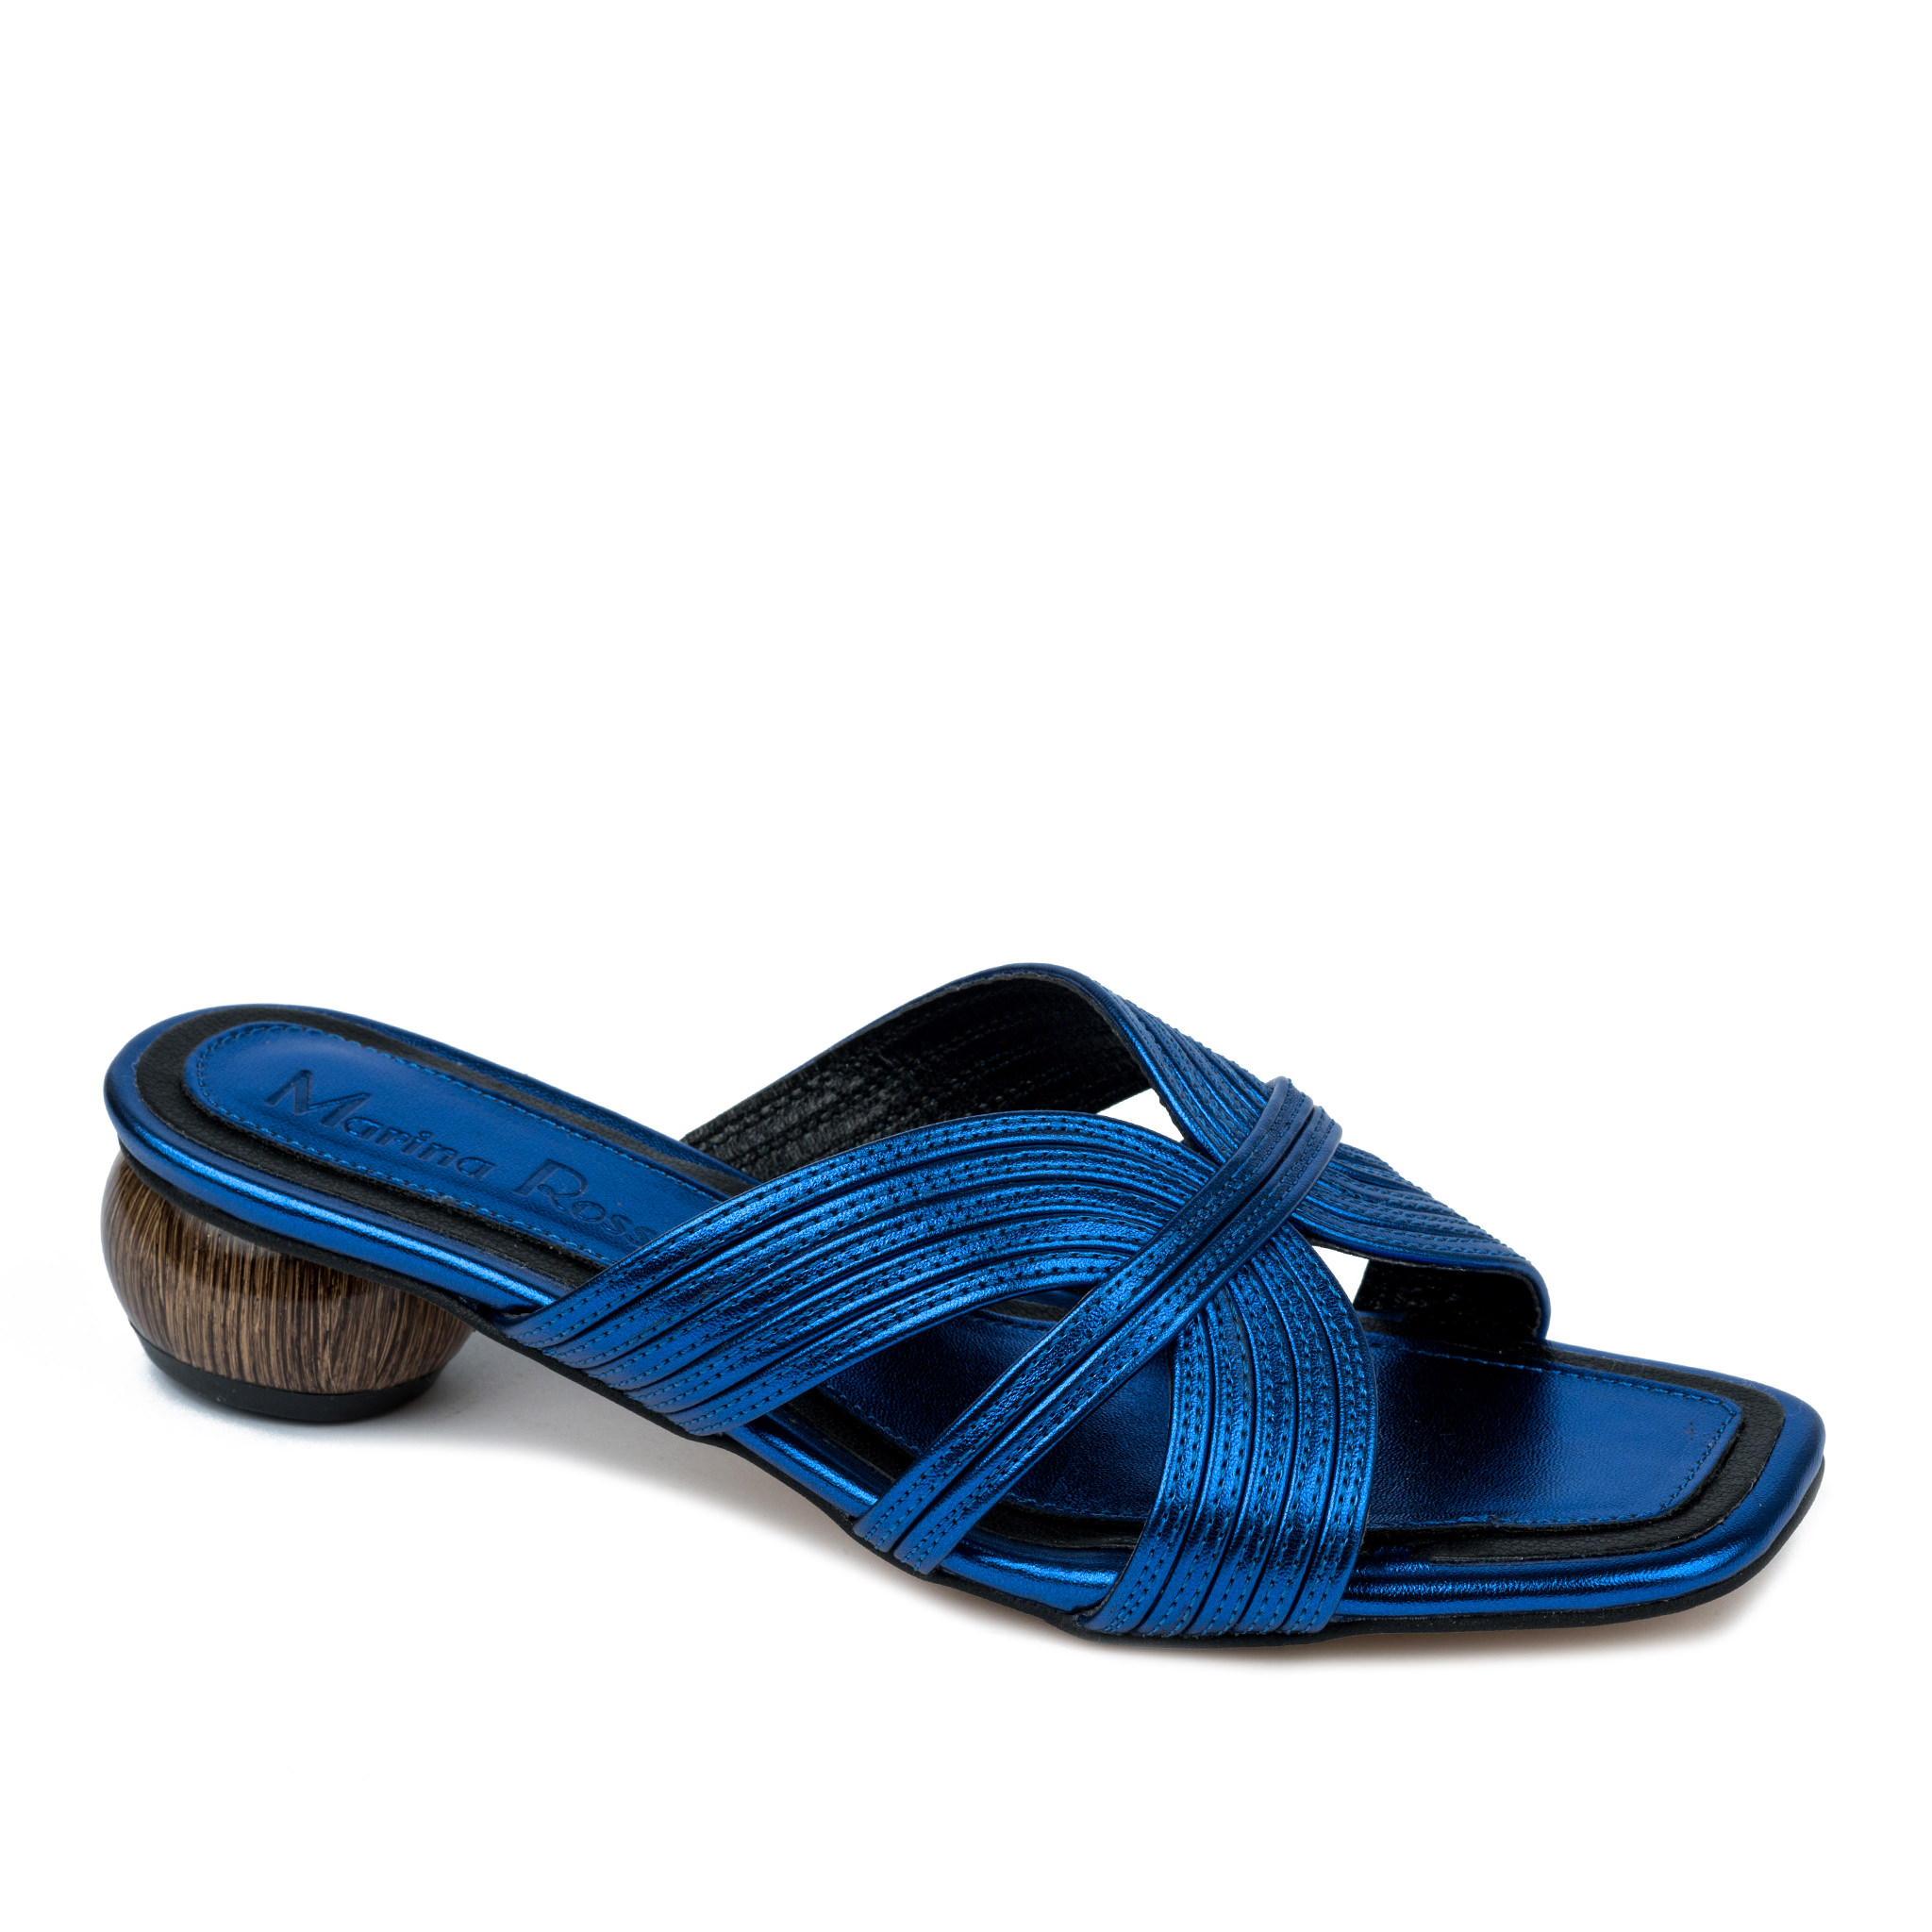 Women Slippers and Mules A550 - BLUE